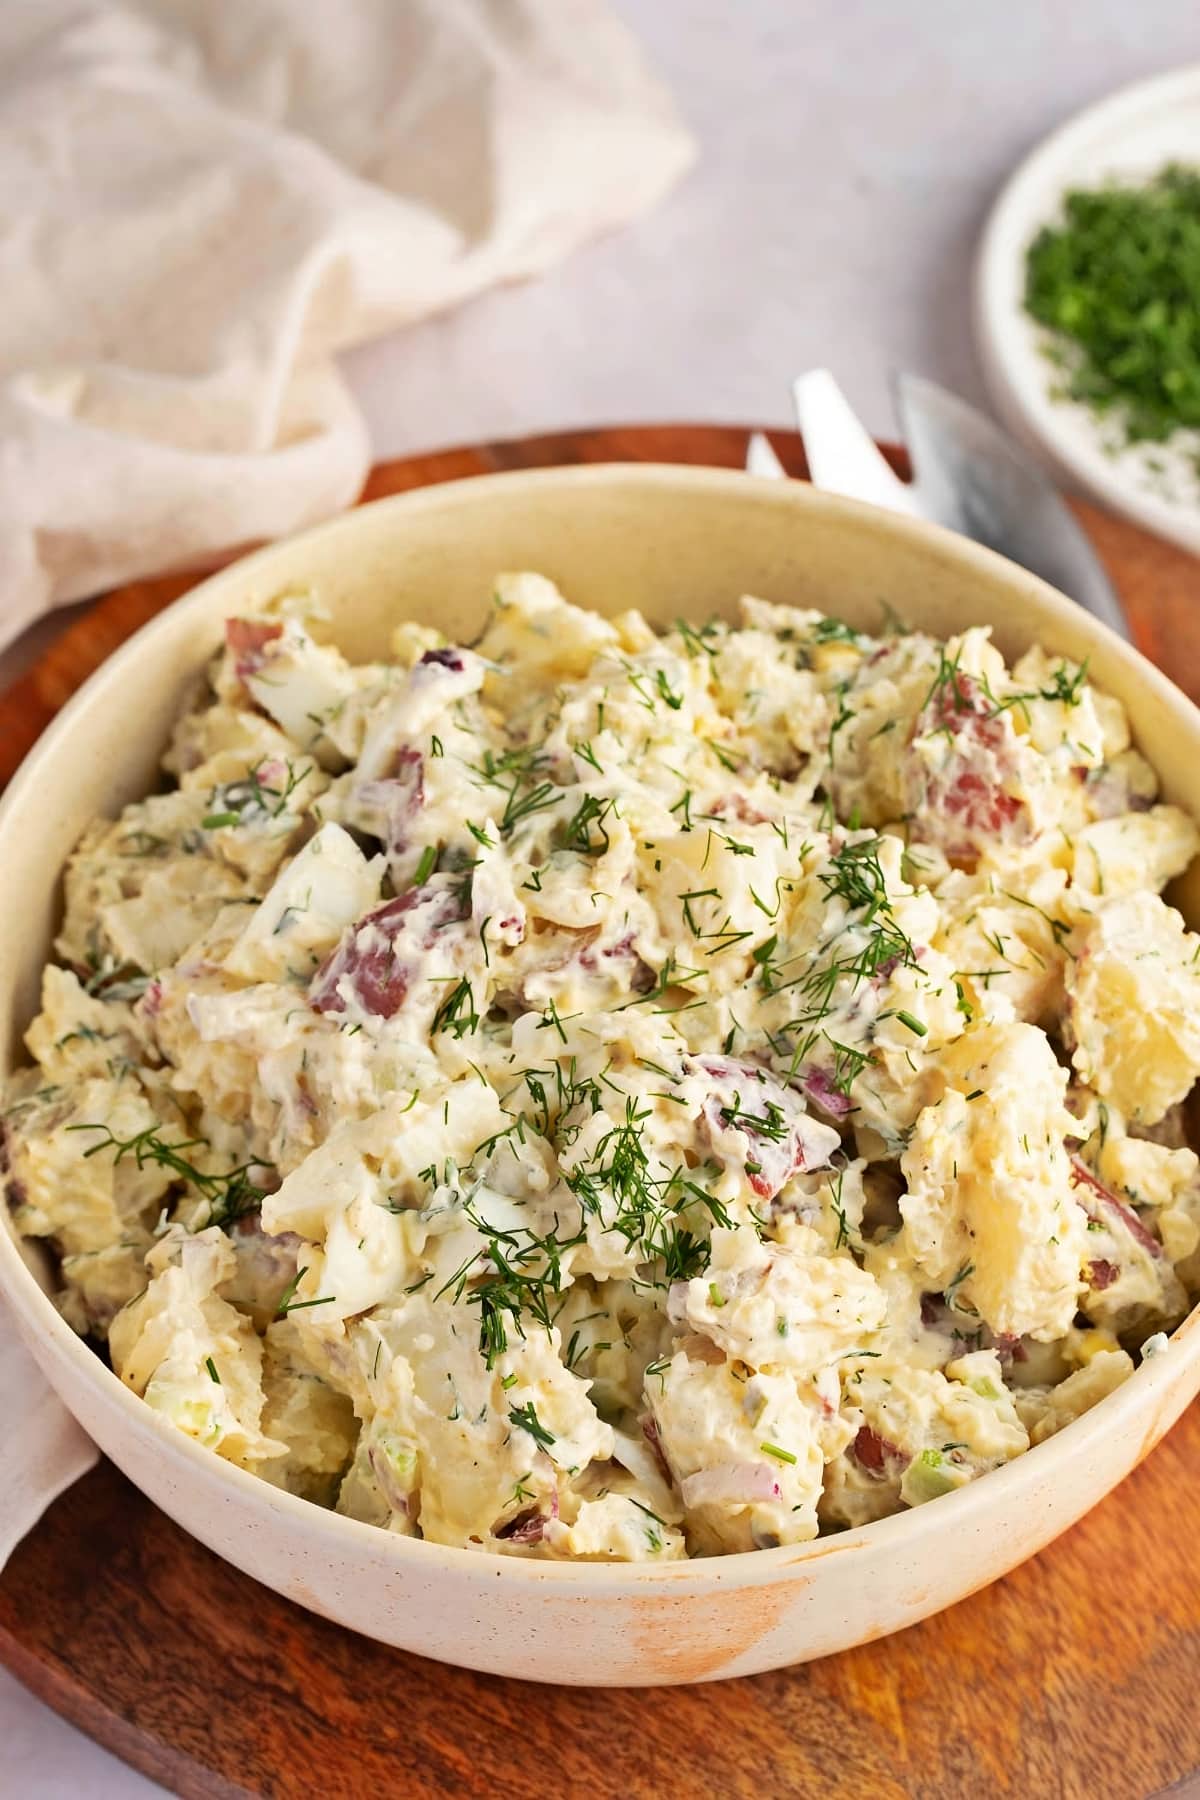 Homemade Red Potato Salad with Dill in a Bowl